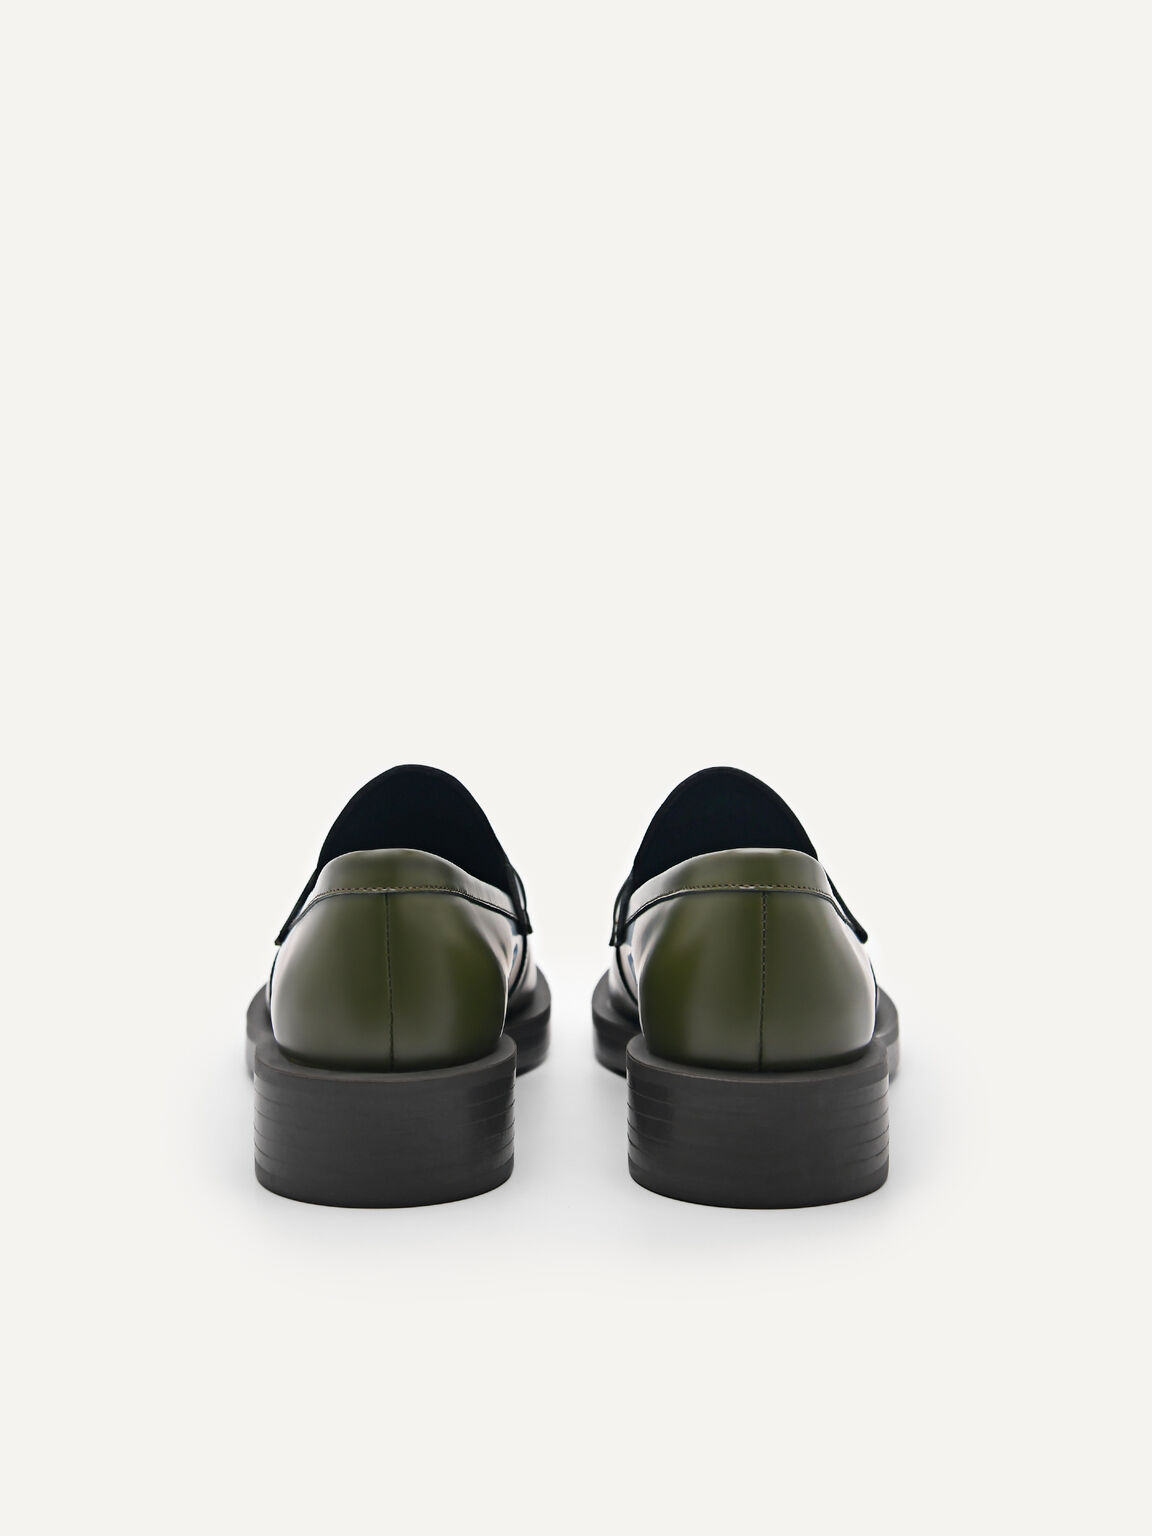 PEDRO Icon Leather Loafers, Military Green, hi-res